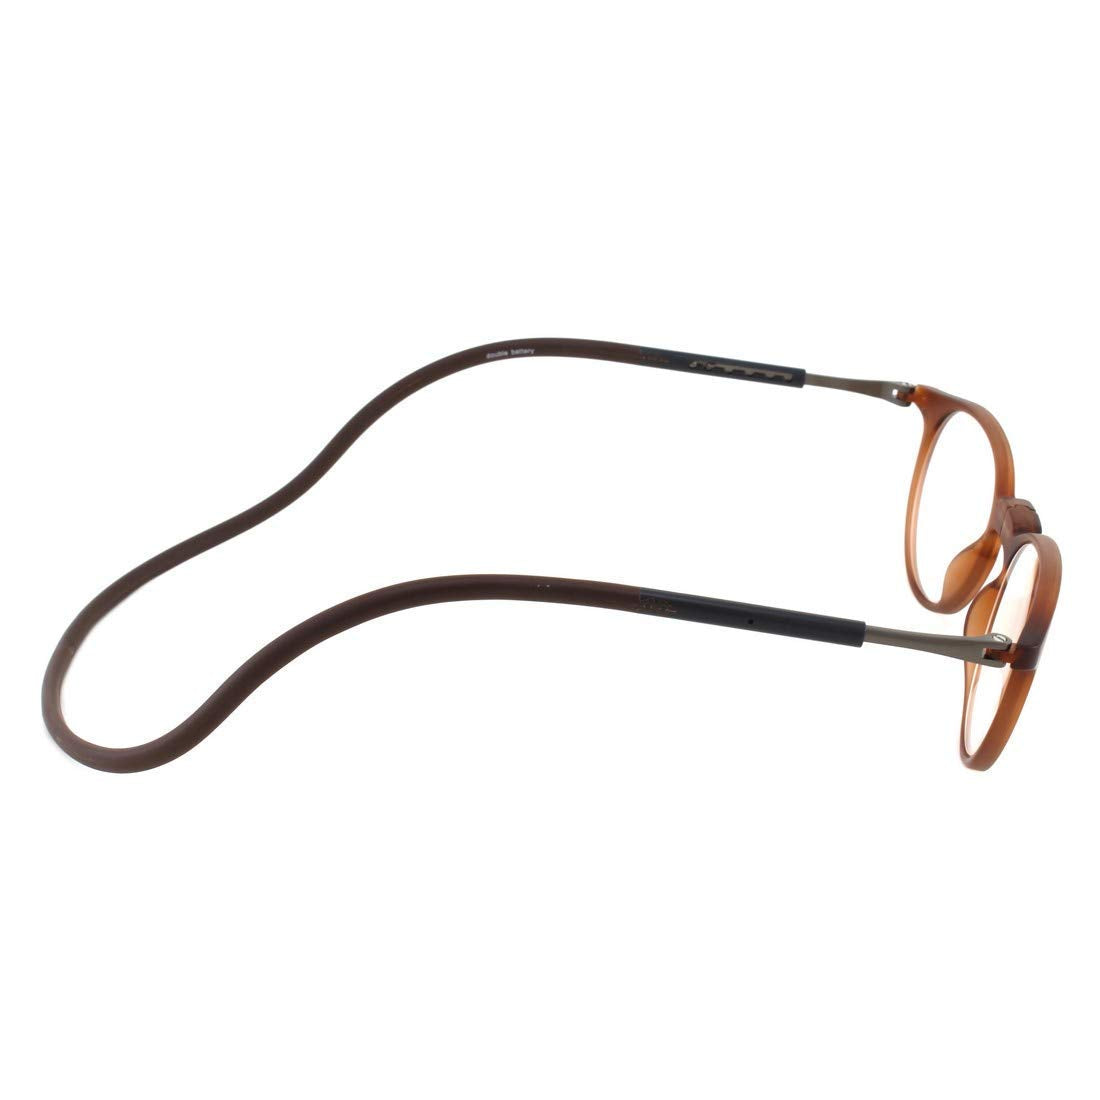 Round Magnetic Easyflex Reading Spectacle Glasses Suitable For Near Vision Color Brown